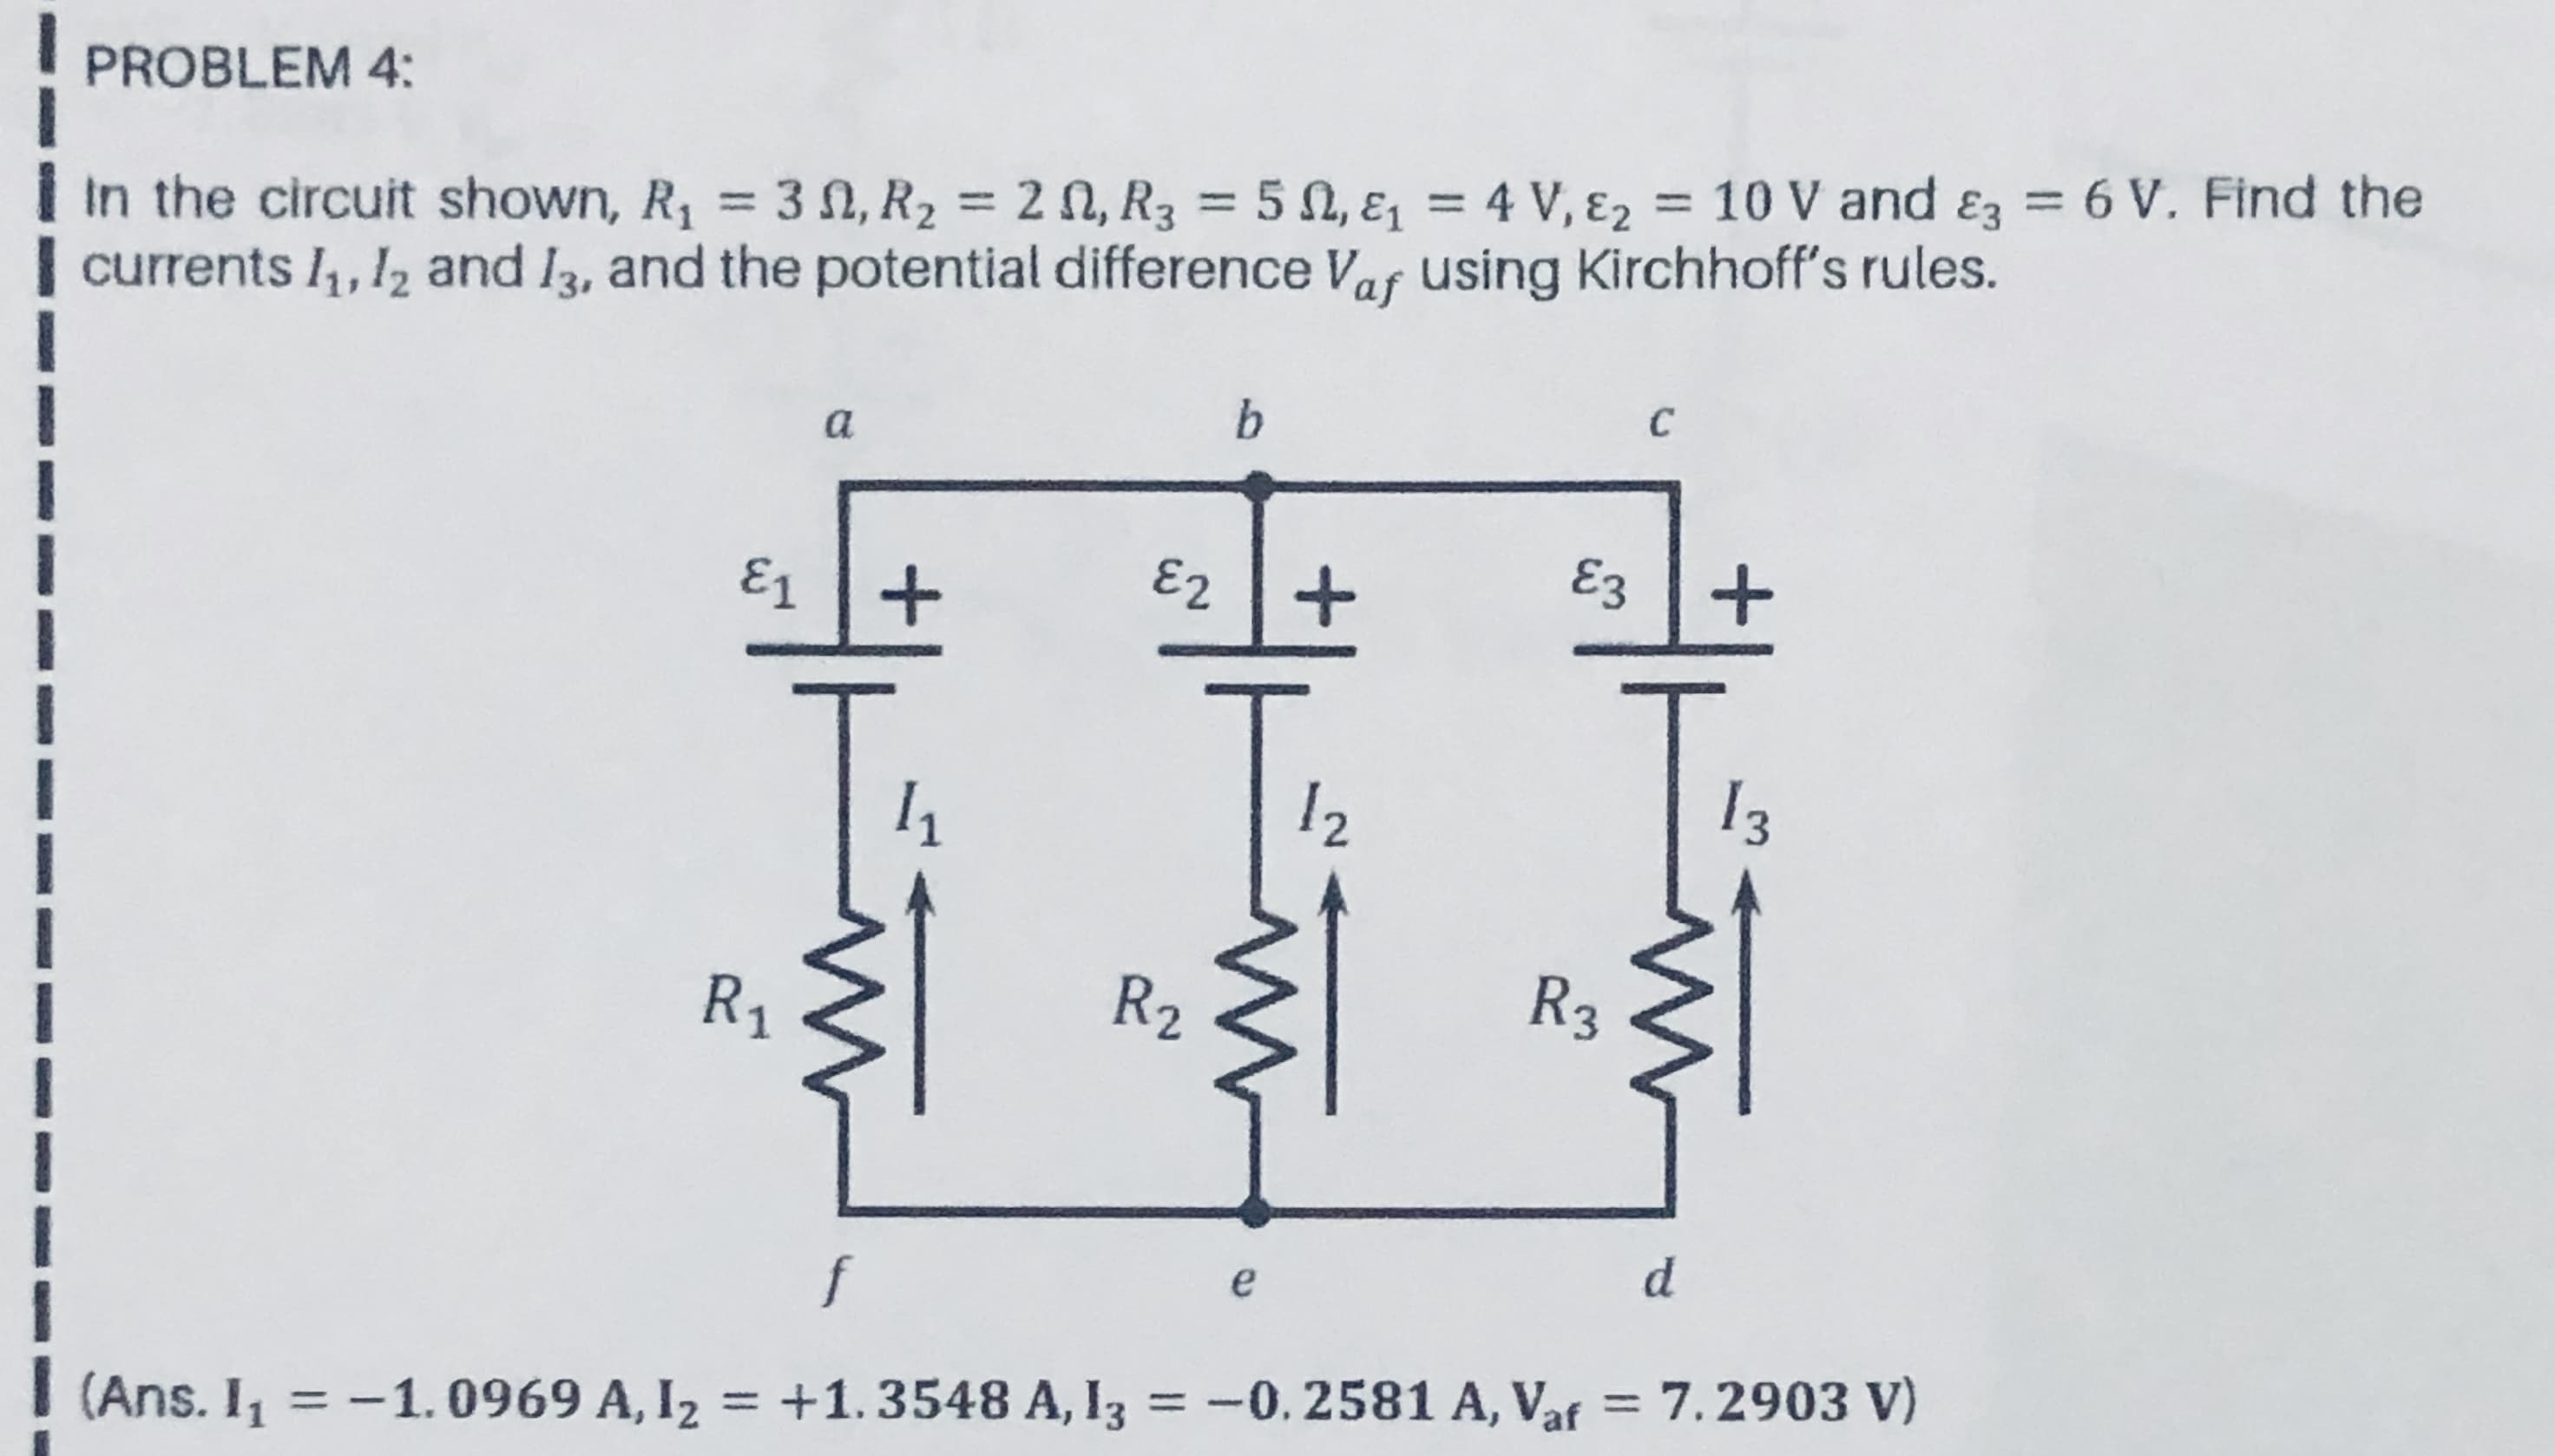 = 10 V and &z = 6 V. Find th
In the circuit shown, R, = 3 N, R2 = 2 N, R3 = 5 N, ɛ = 4 V, ɛ2
currents I,, 12 and I3, and the potential difference Vaf using Kirchhoff's rules.
%3D
%3D
%3D
C
a
E1
E2+
Ez+
12
I3
R1
R2
R3
f
